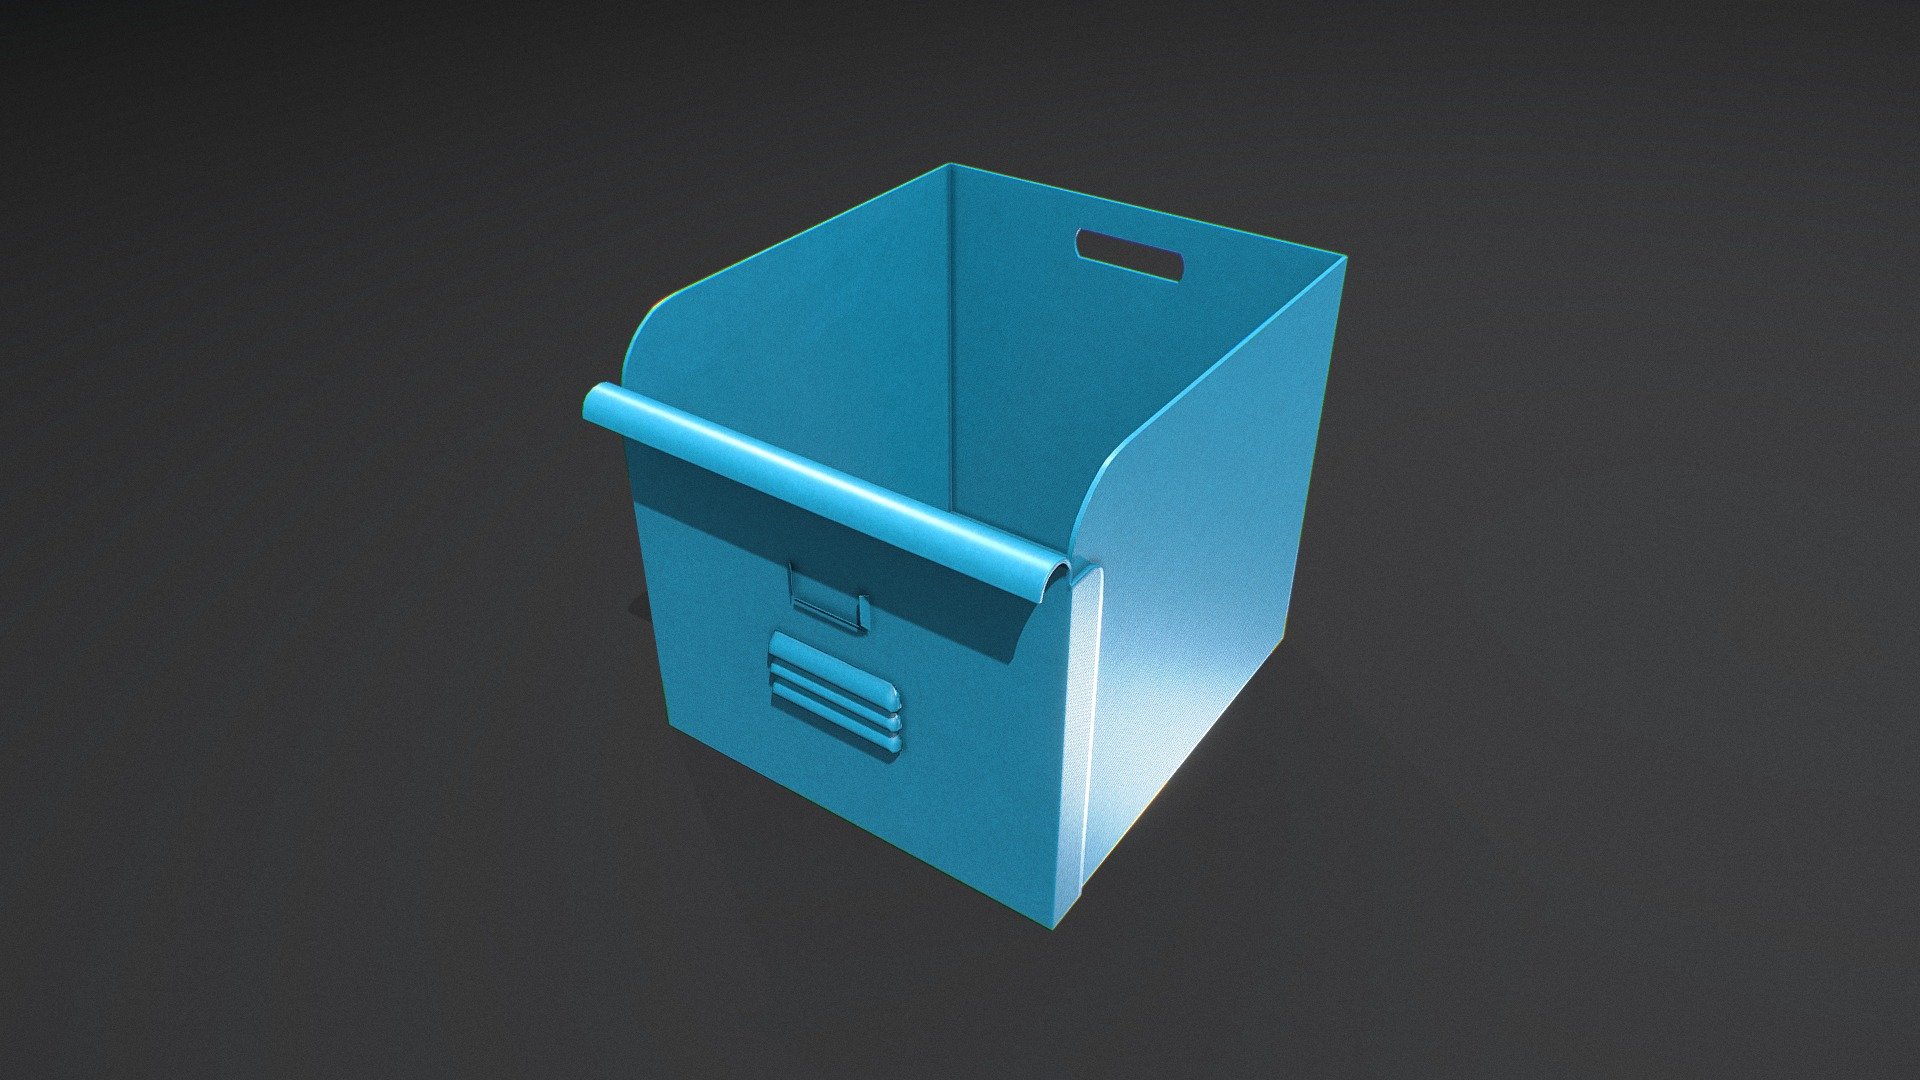 3d model of a storage box for using as a storing product for paper and media boxes. This model was created in latest version of Blender and textured in Substance Painter. This model is made in real proportions.

High resolution of textures.

Metal-ness workflow- Base Color, Normal, Metal-ness, Ambient Occlusion and Roughness Textures - PNG 3d model